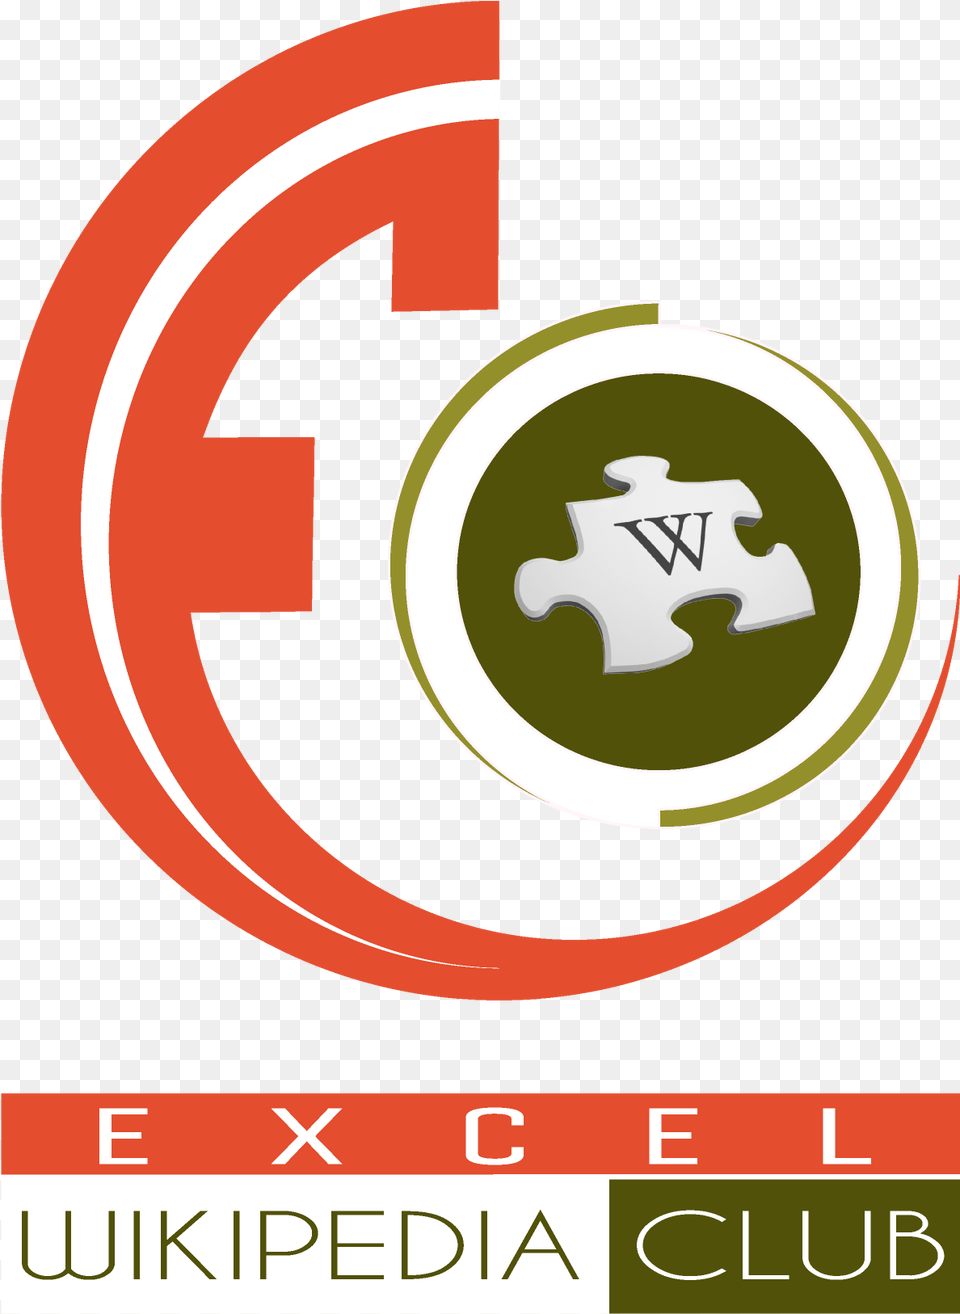 Excel Wikipedia Logo Graphic Design Png Image